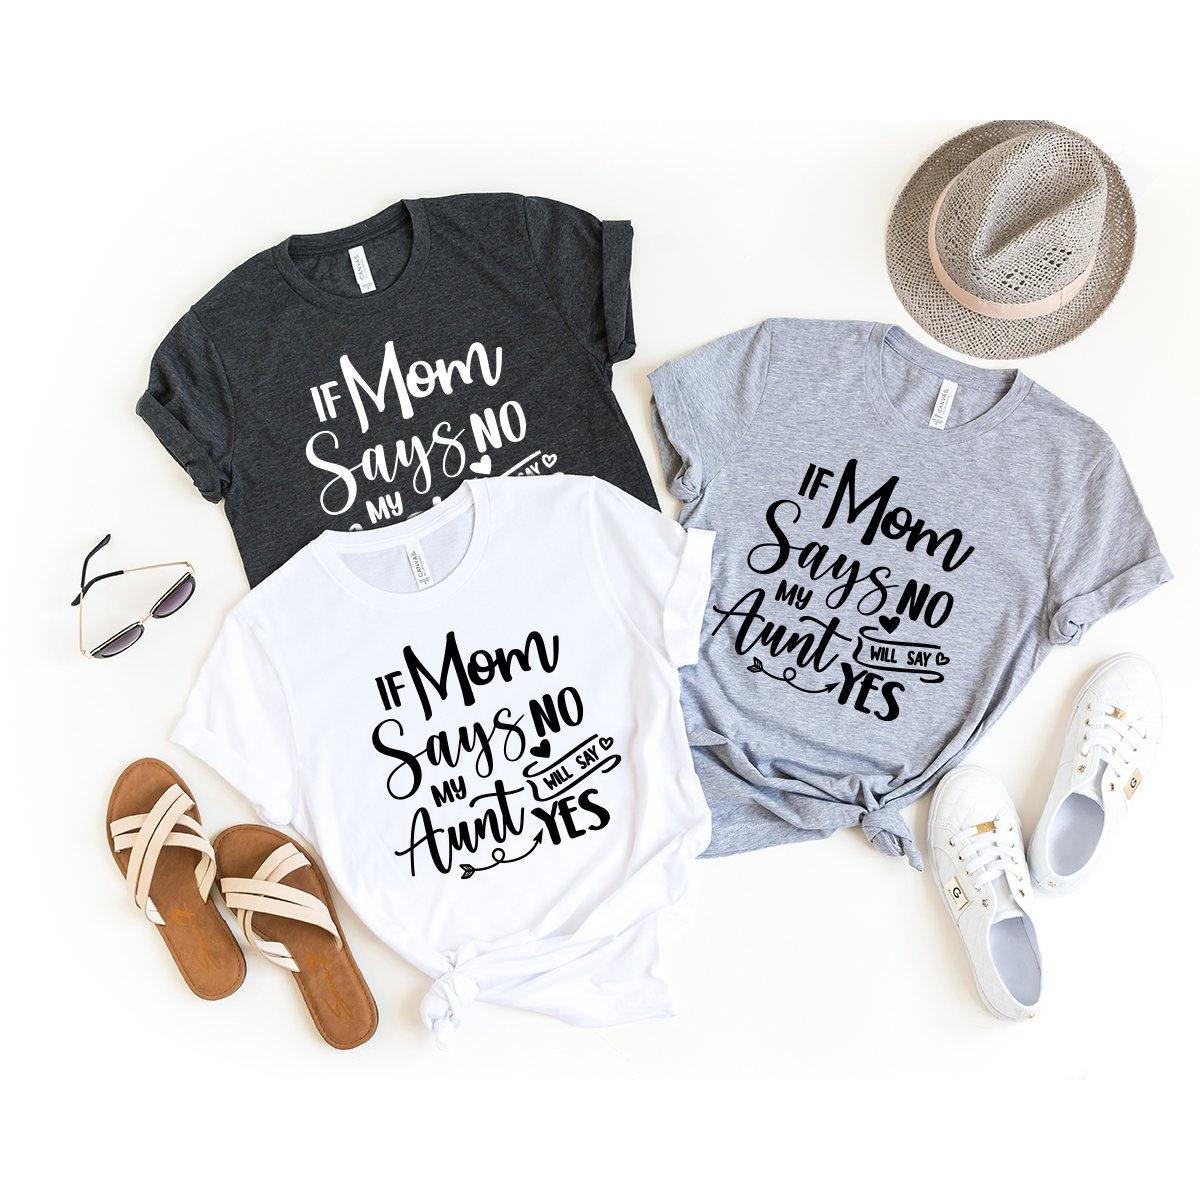 Funny Aunt Shirts, Gift For Aunt, Aunt T-shirt, Best Aunt Ever Tee, Auntie Tee, Aunt Gift, If Mom Says No My Aunt Will Say Yes Shirt - Fastdeliverytees.com